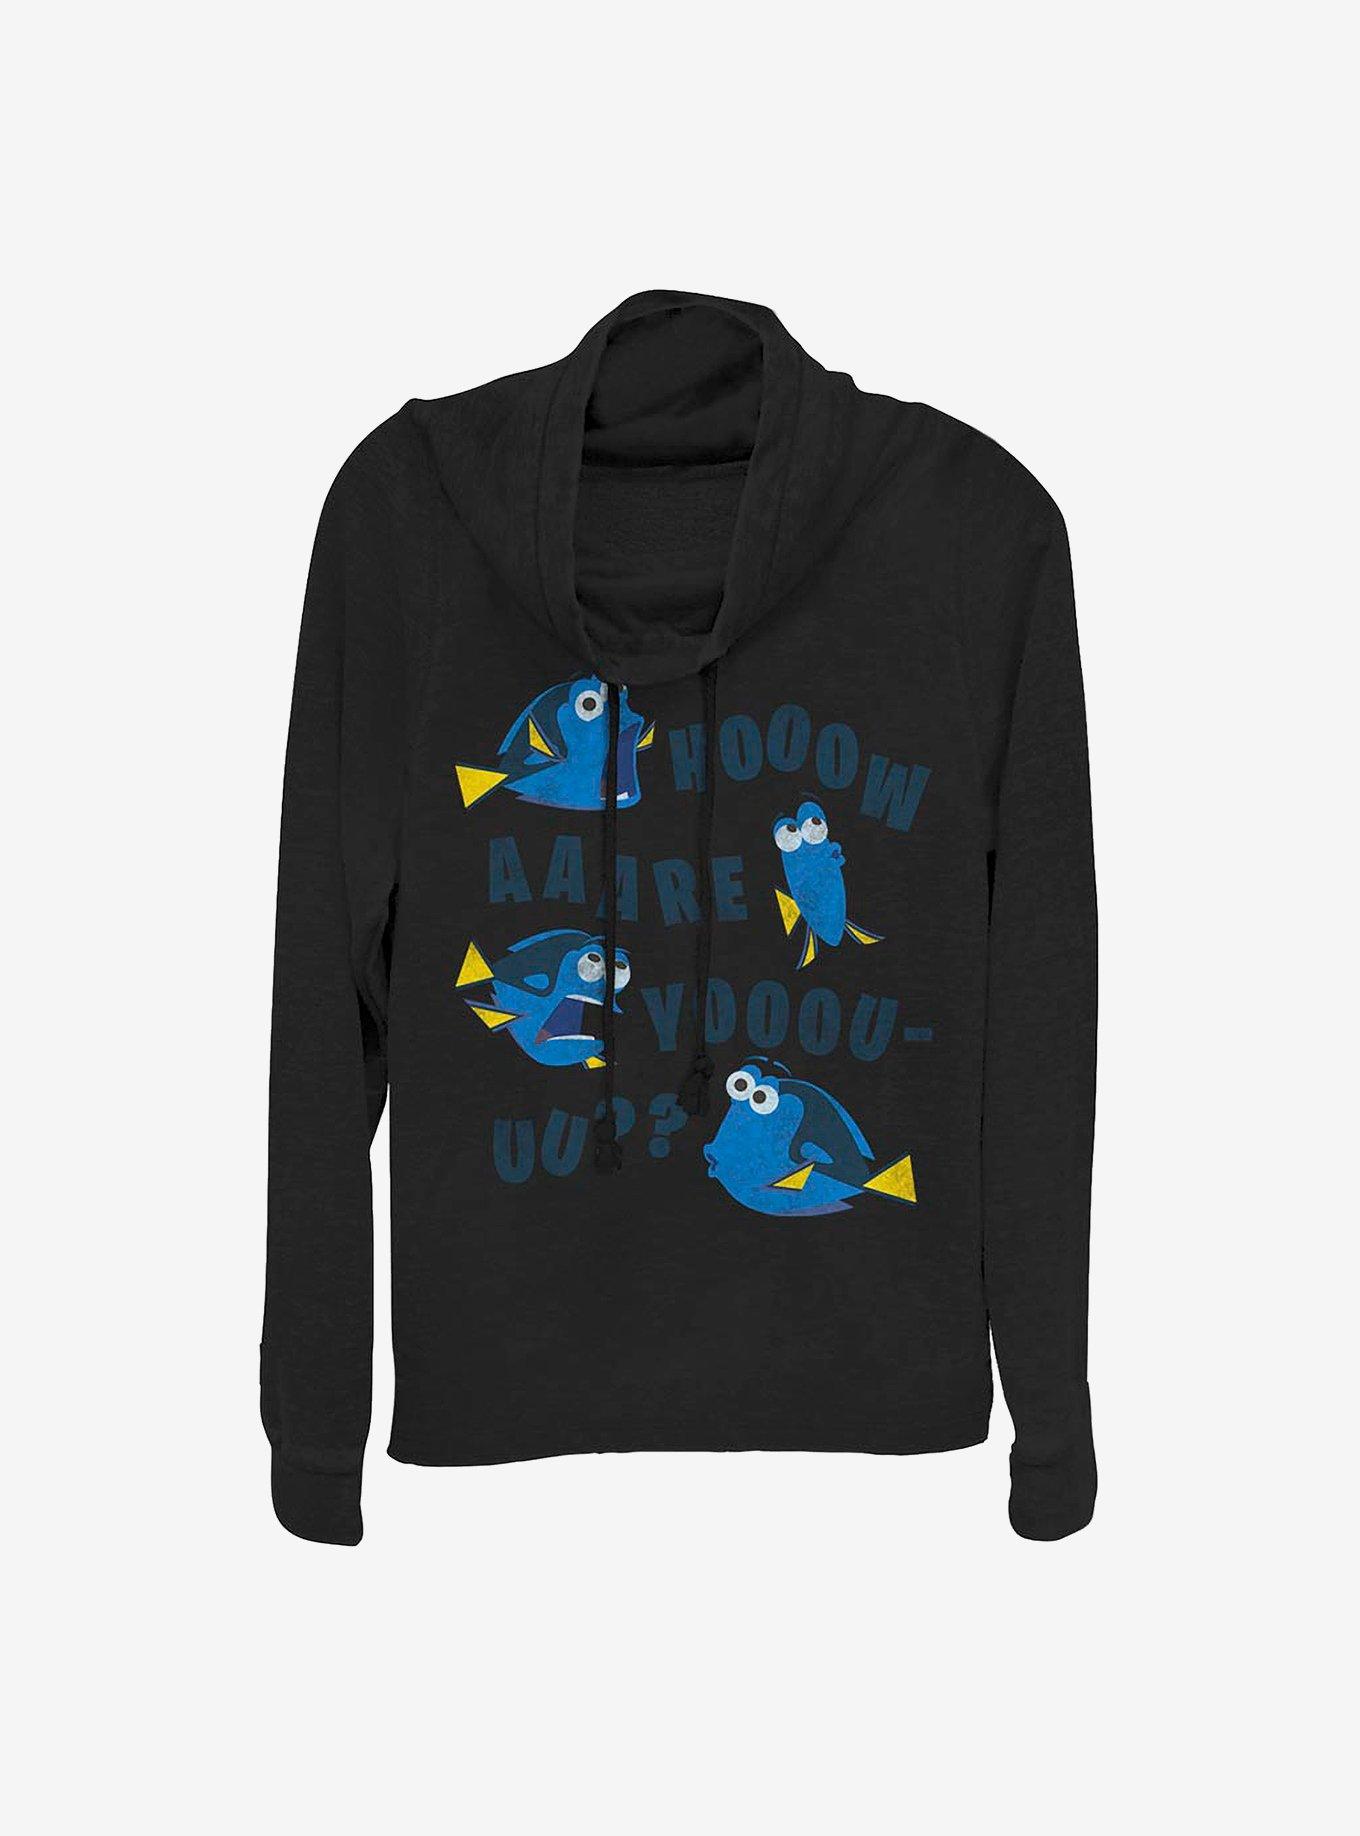 Disney Pixar Finding Nemo Dory How Are You? Cowlneck Long-Sleeve Girls Top